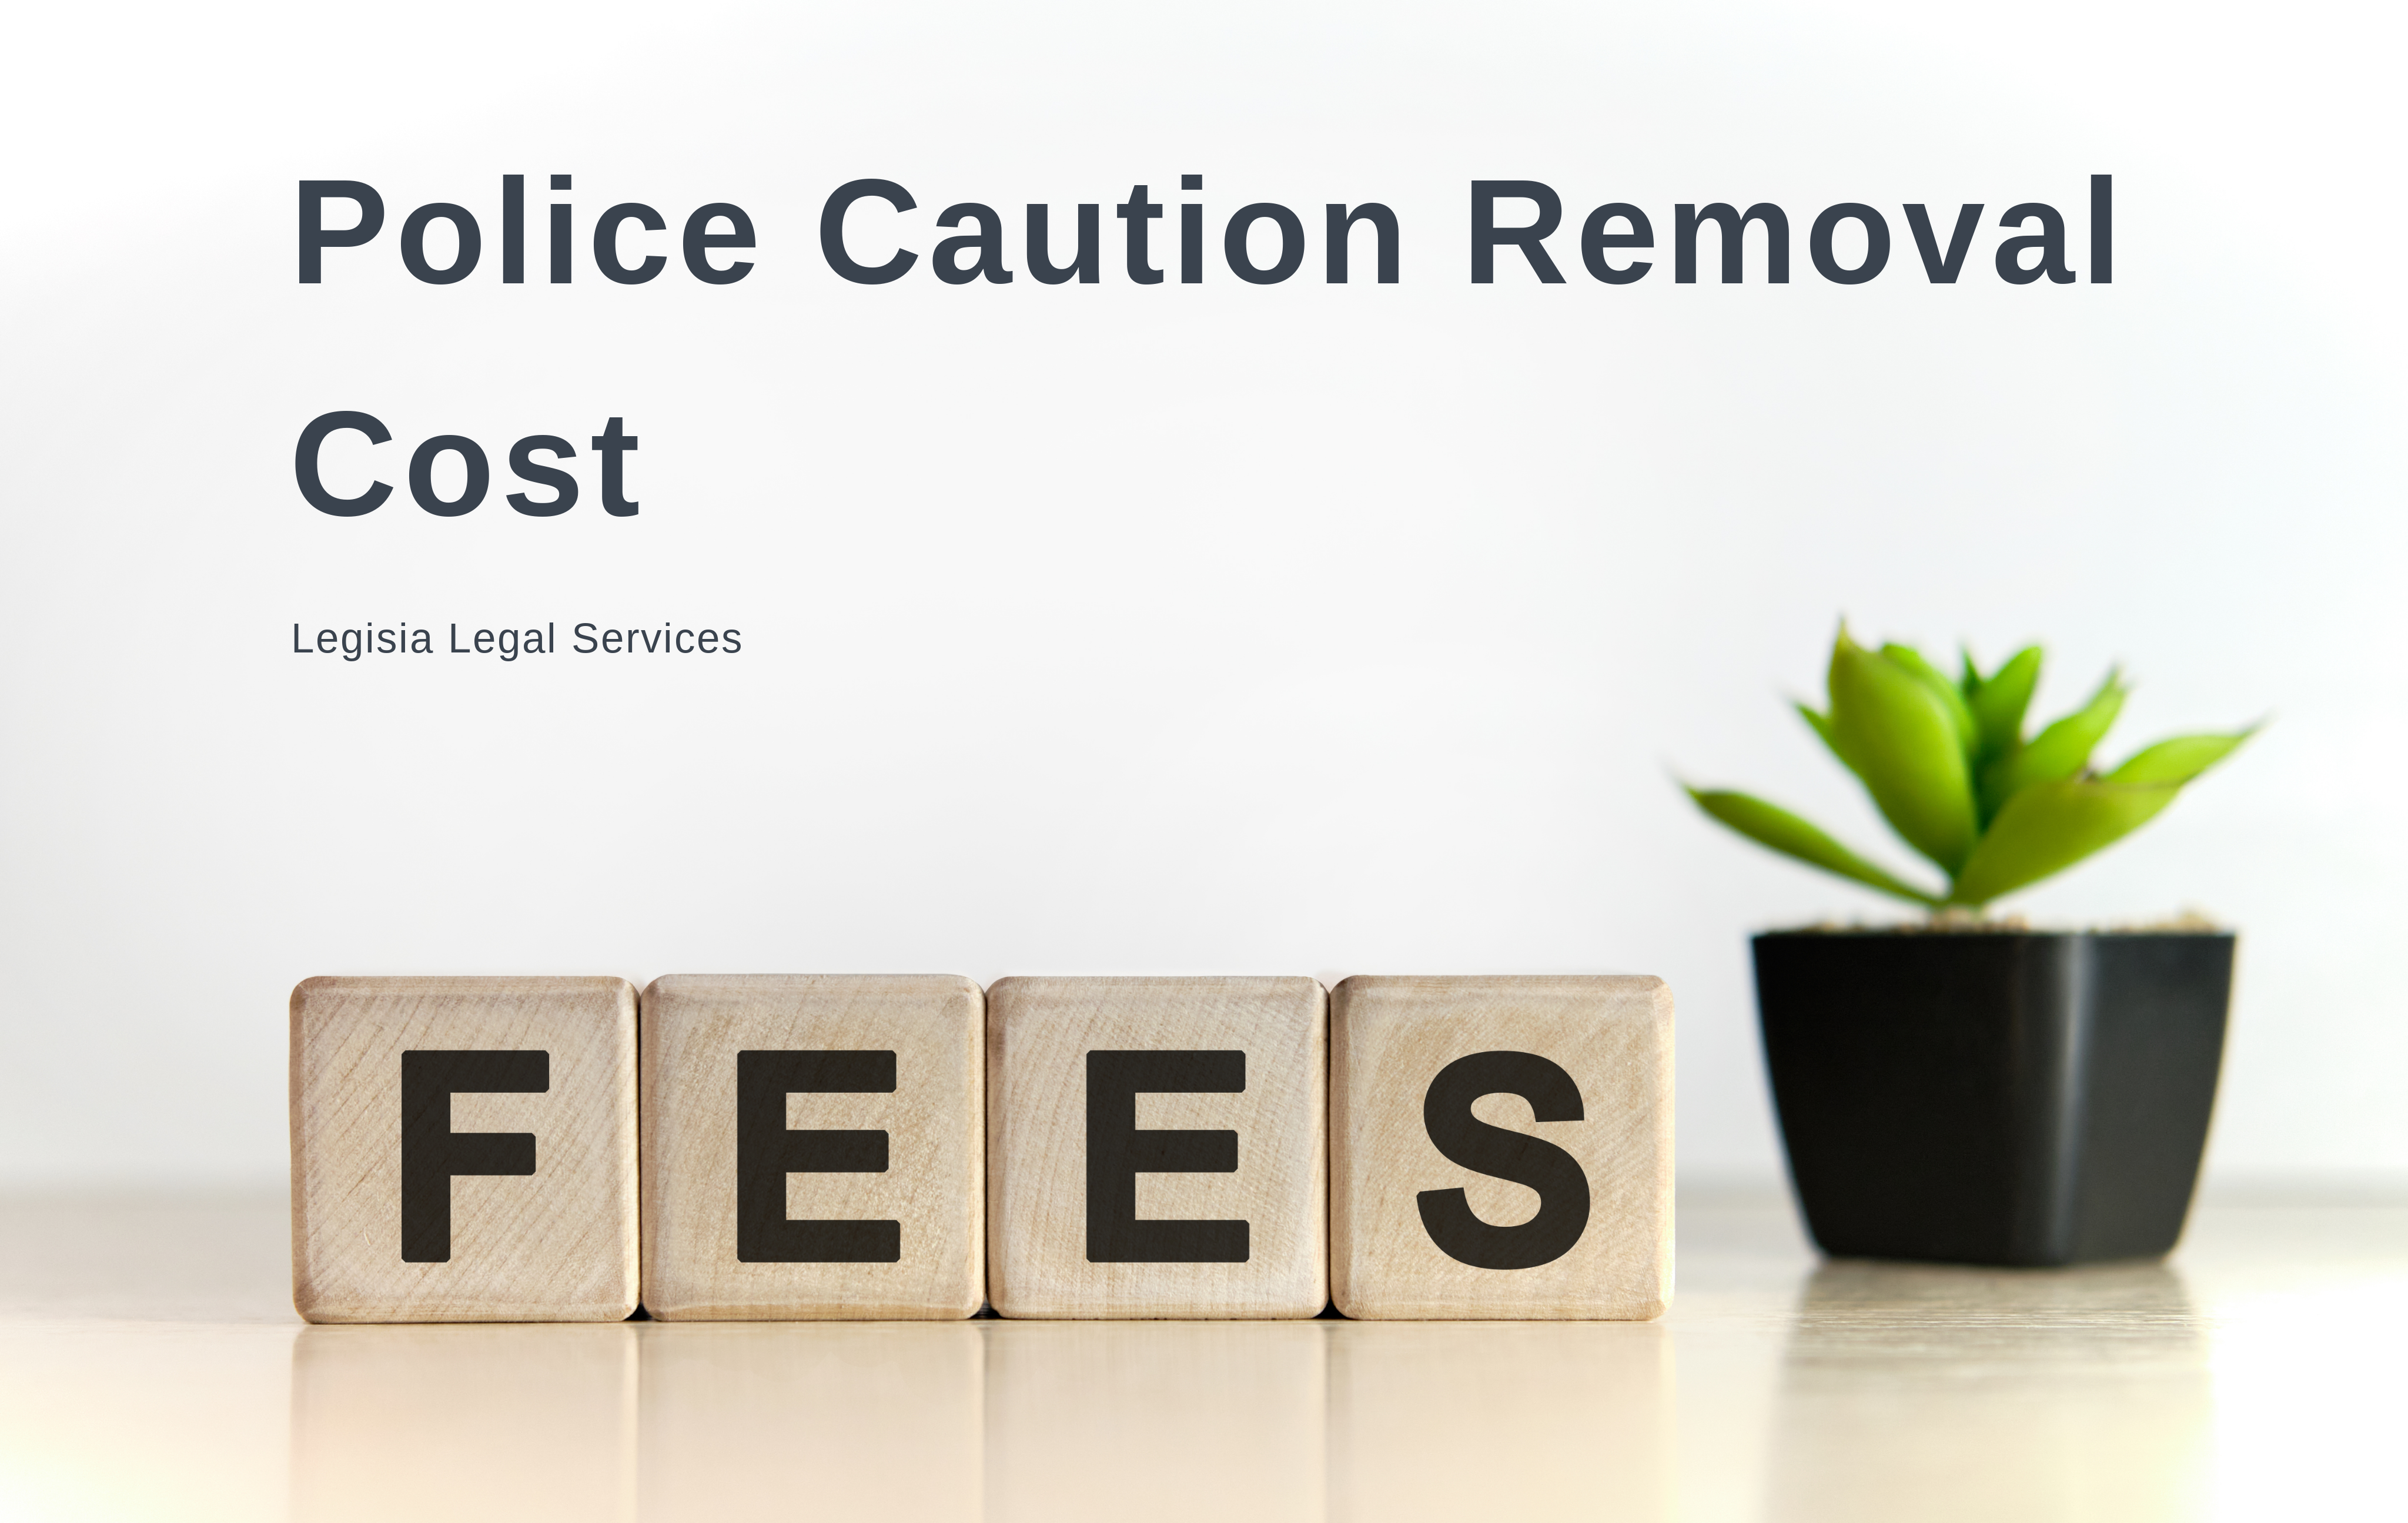 Police Caution Removal Cost